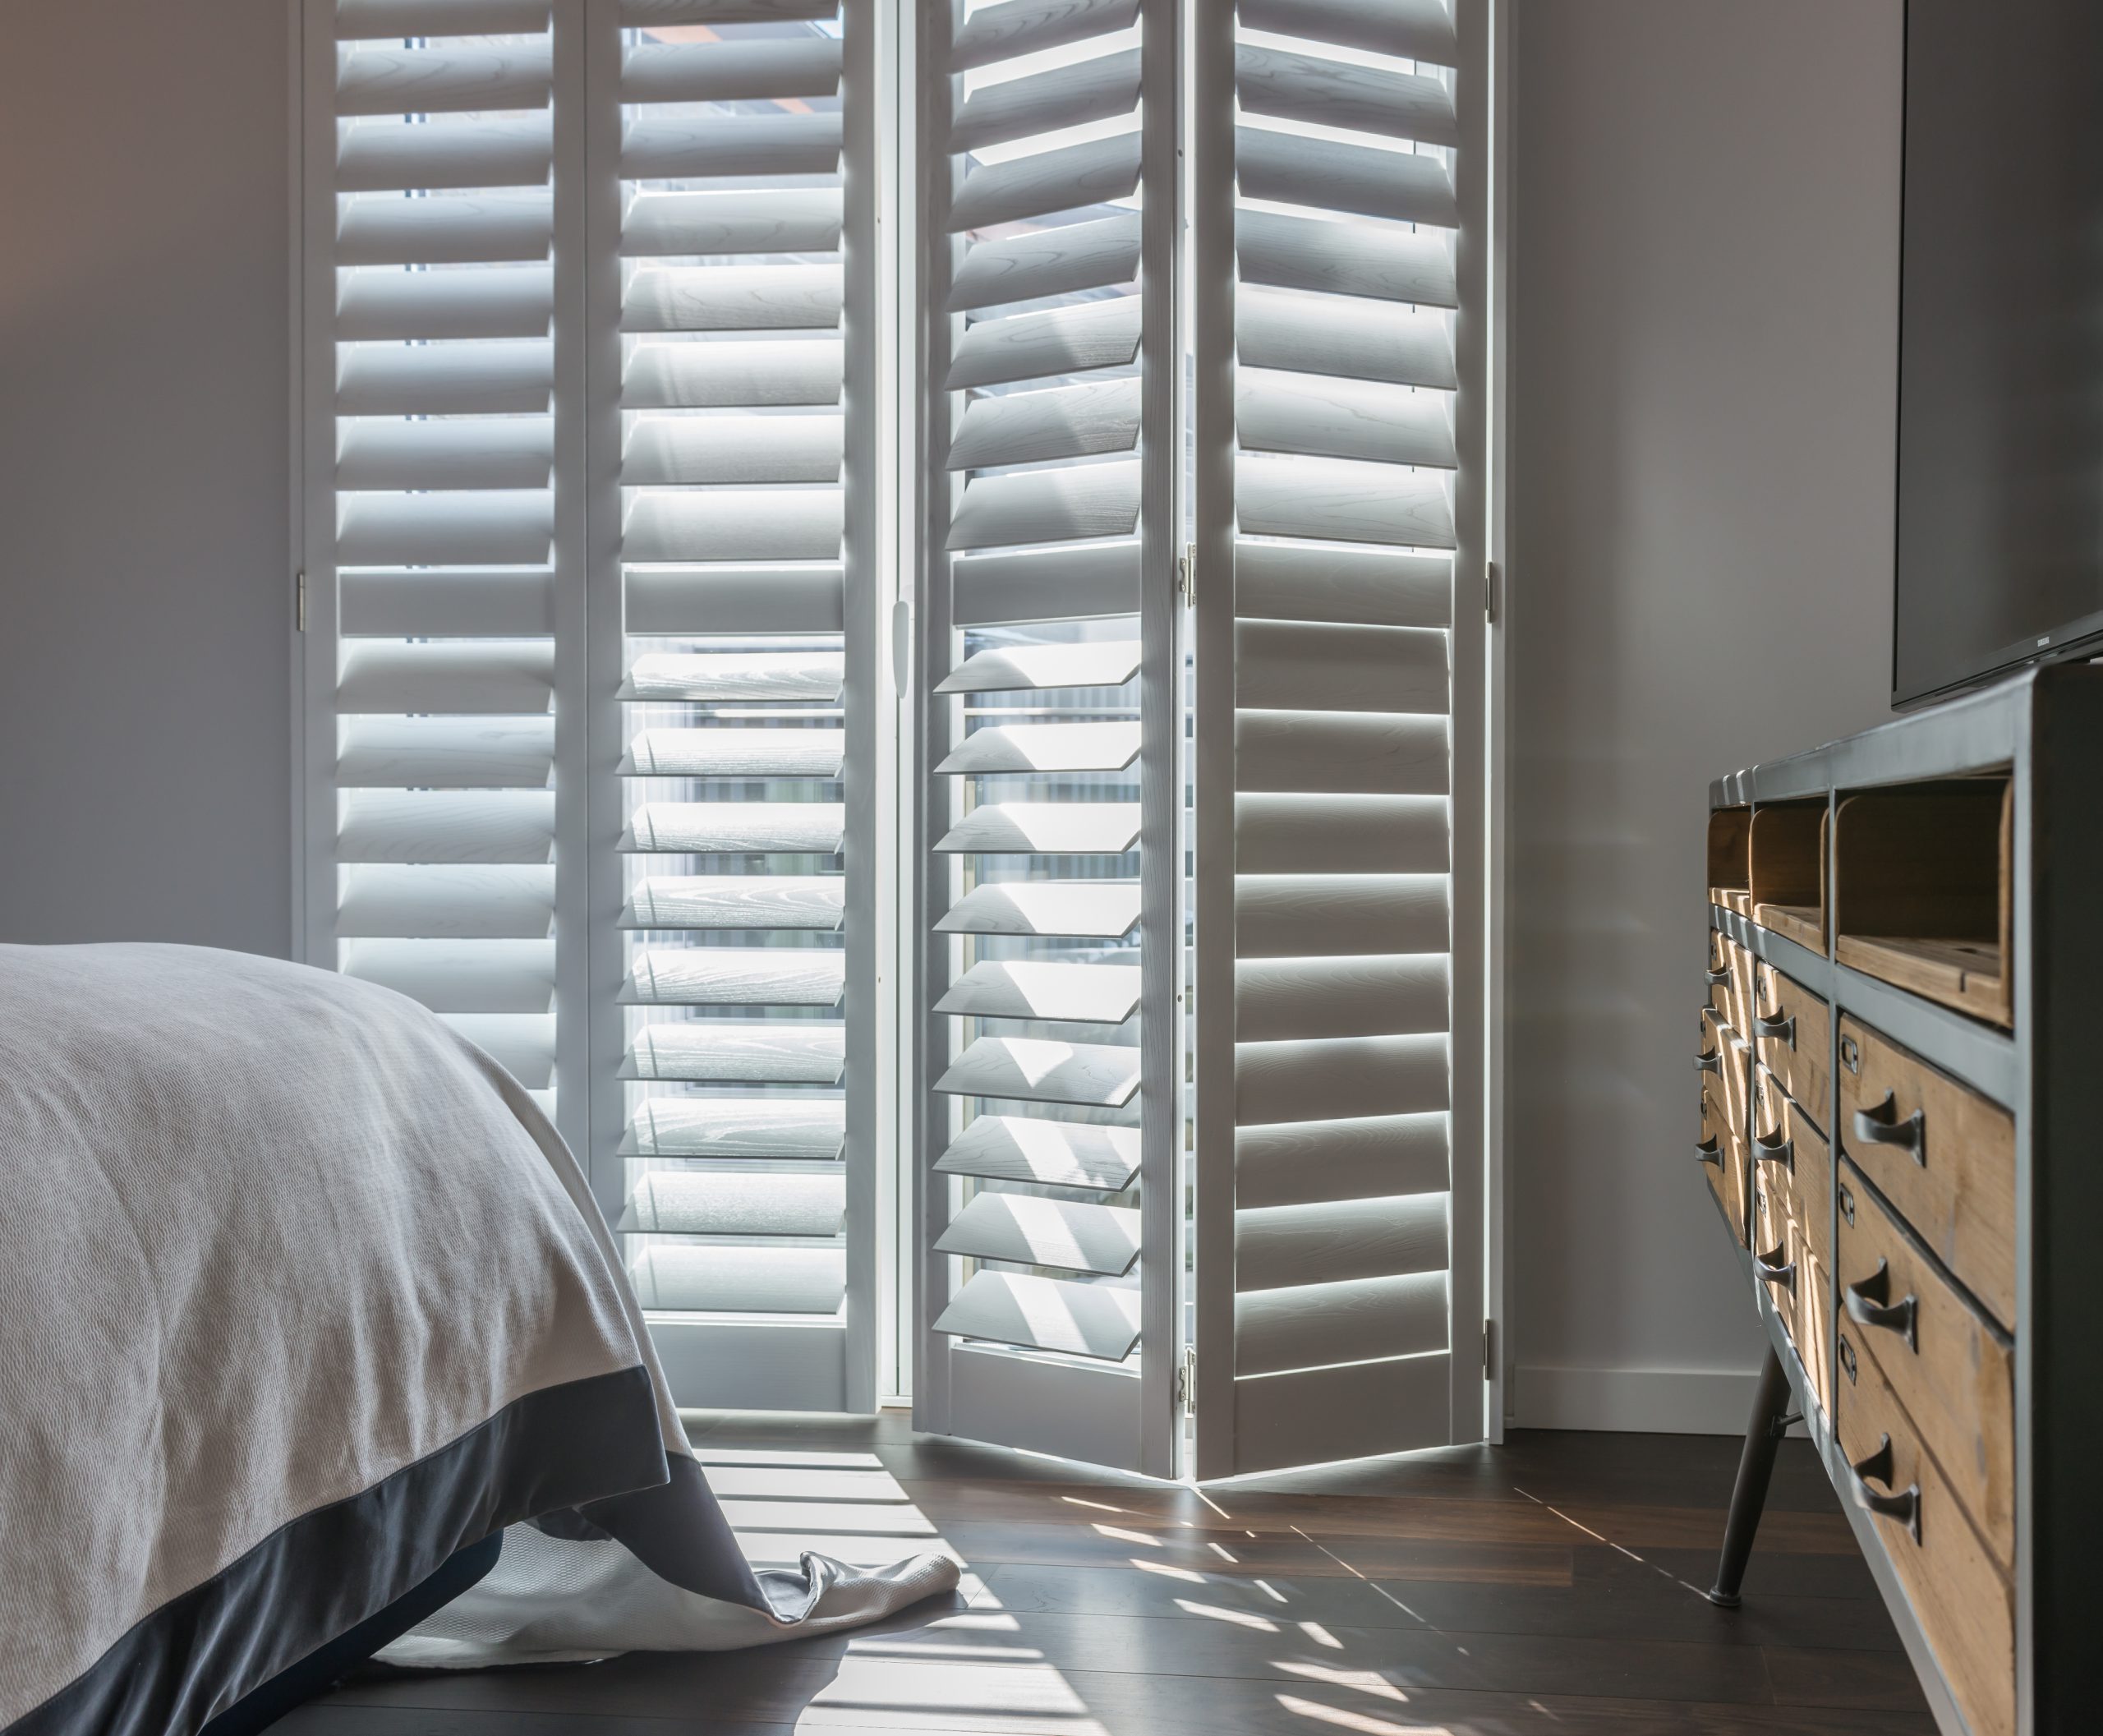 Tracked wooden bedroom window shutters in white complementing a bed and rustic drawers